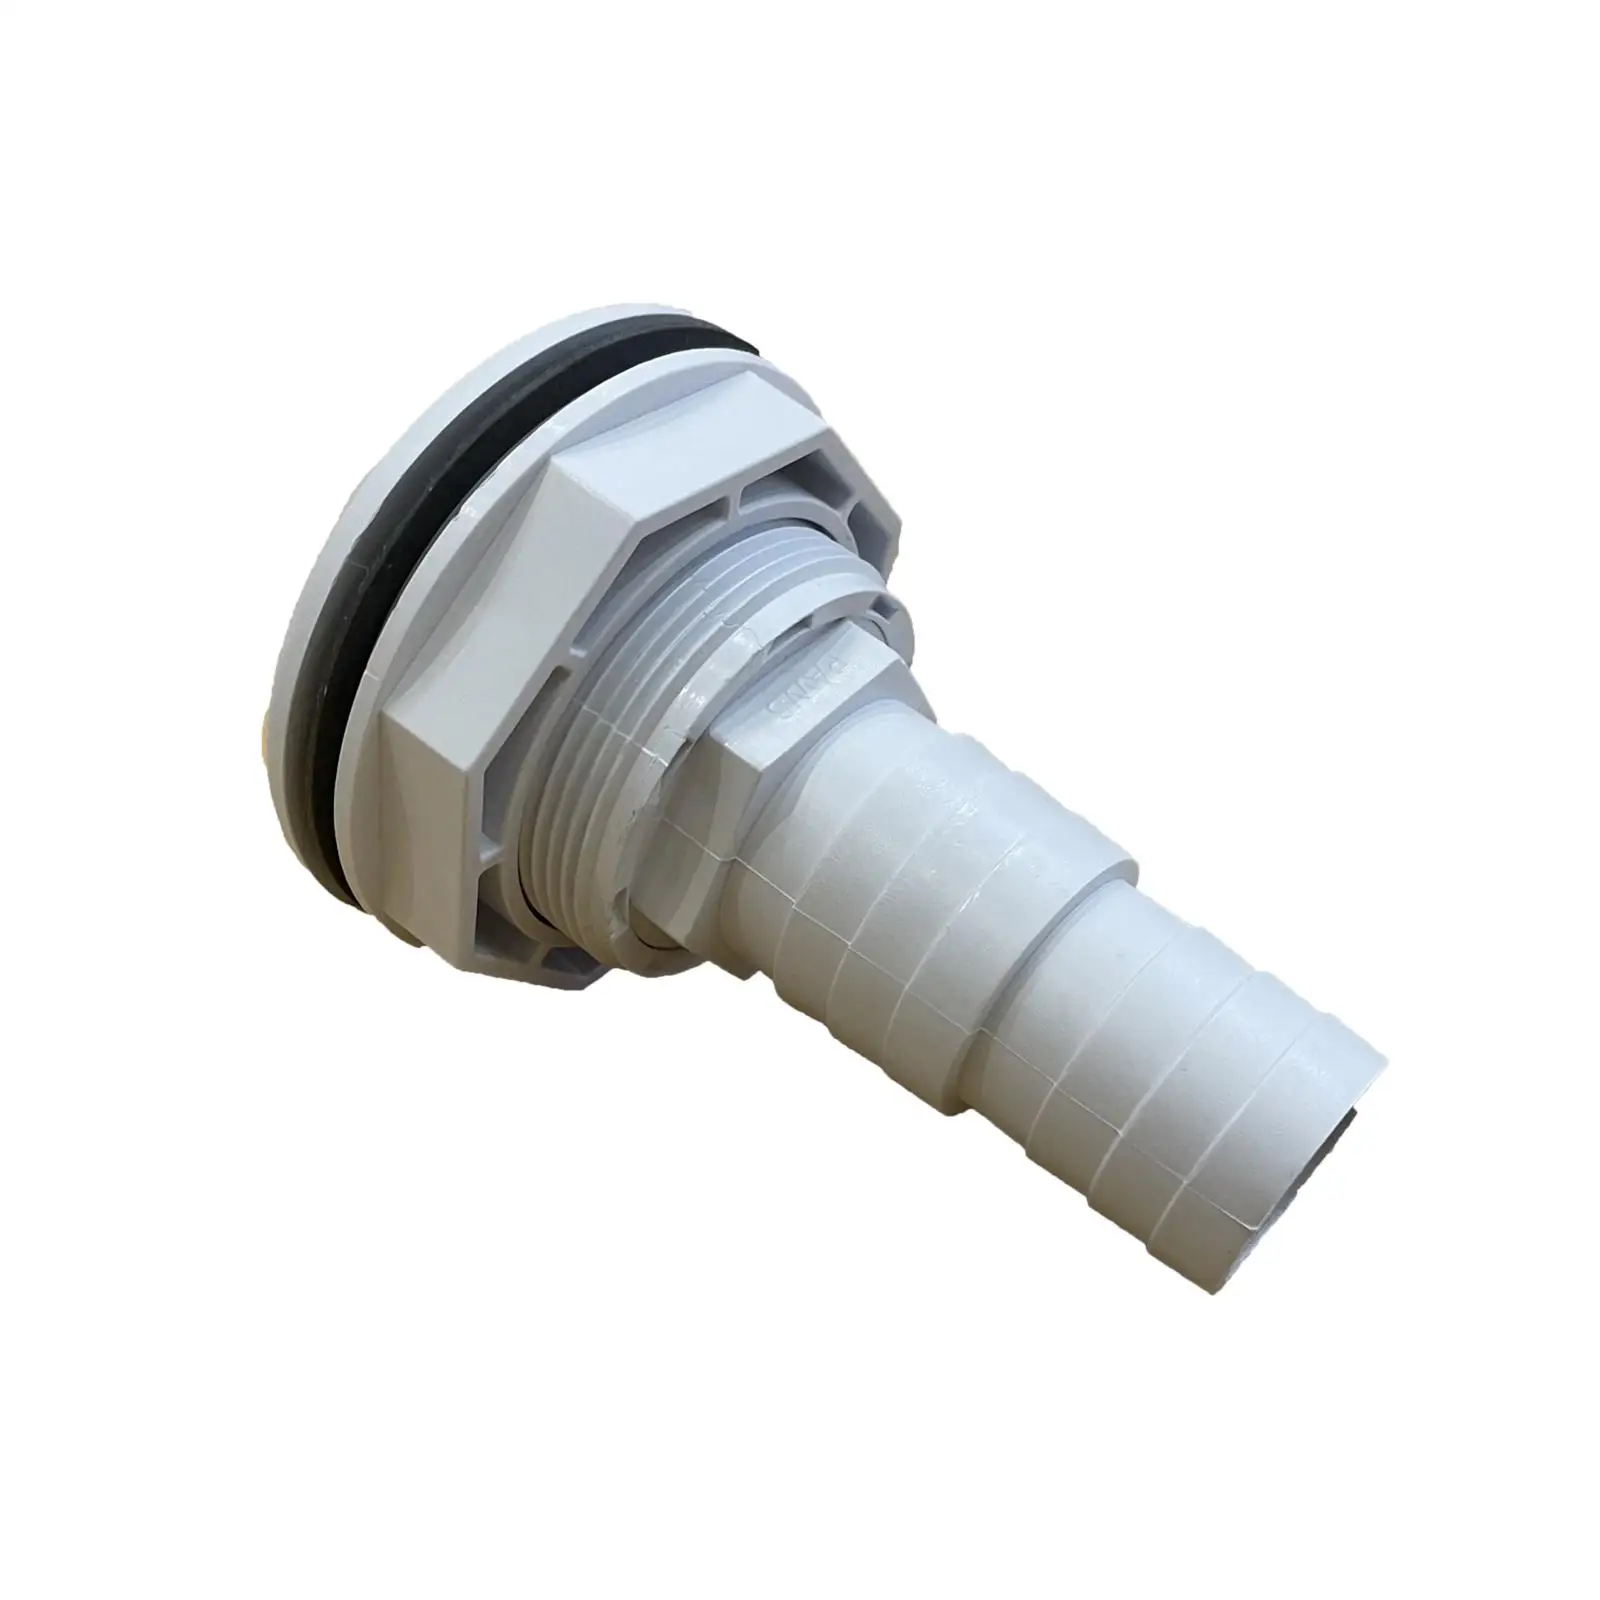 Complete Return Inlet Jet Fittings Parts Durable with Gasket and Adapter Replacement. 1/2`` Easy to Install for Ground Pool